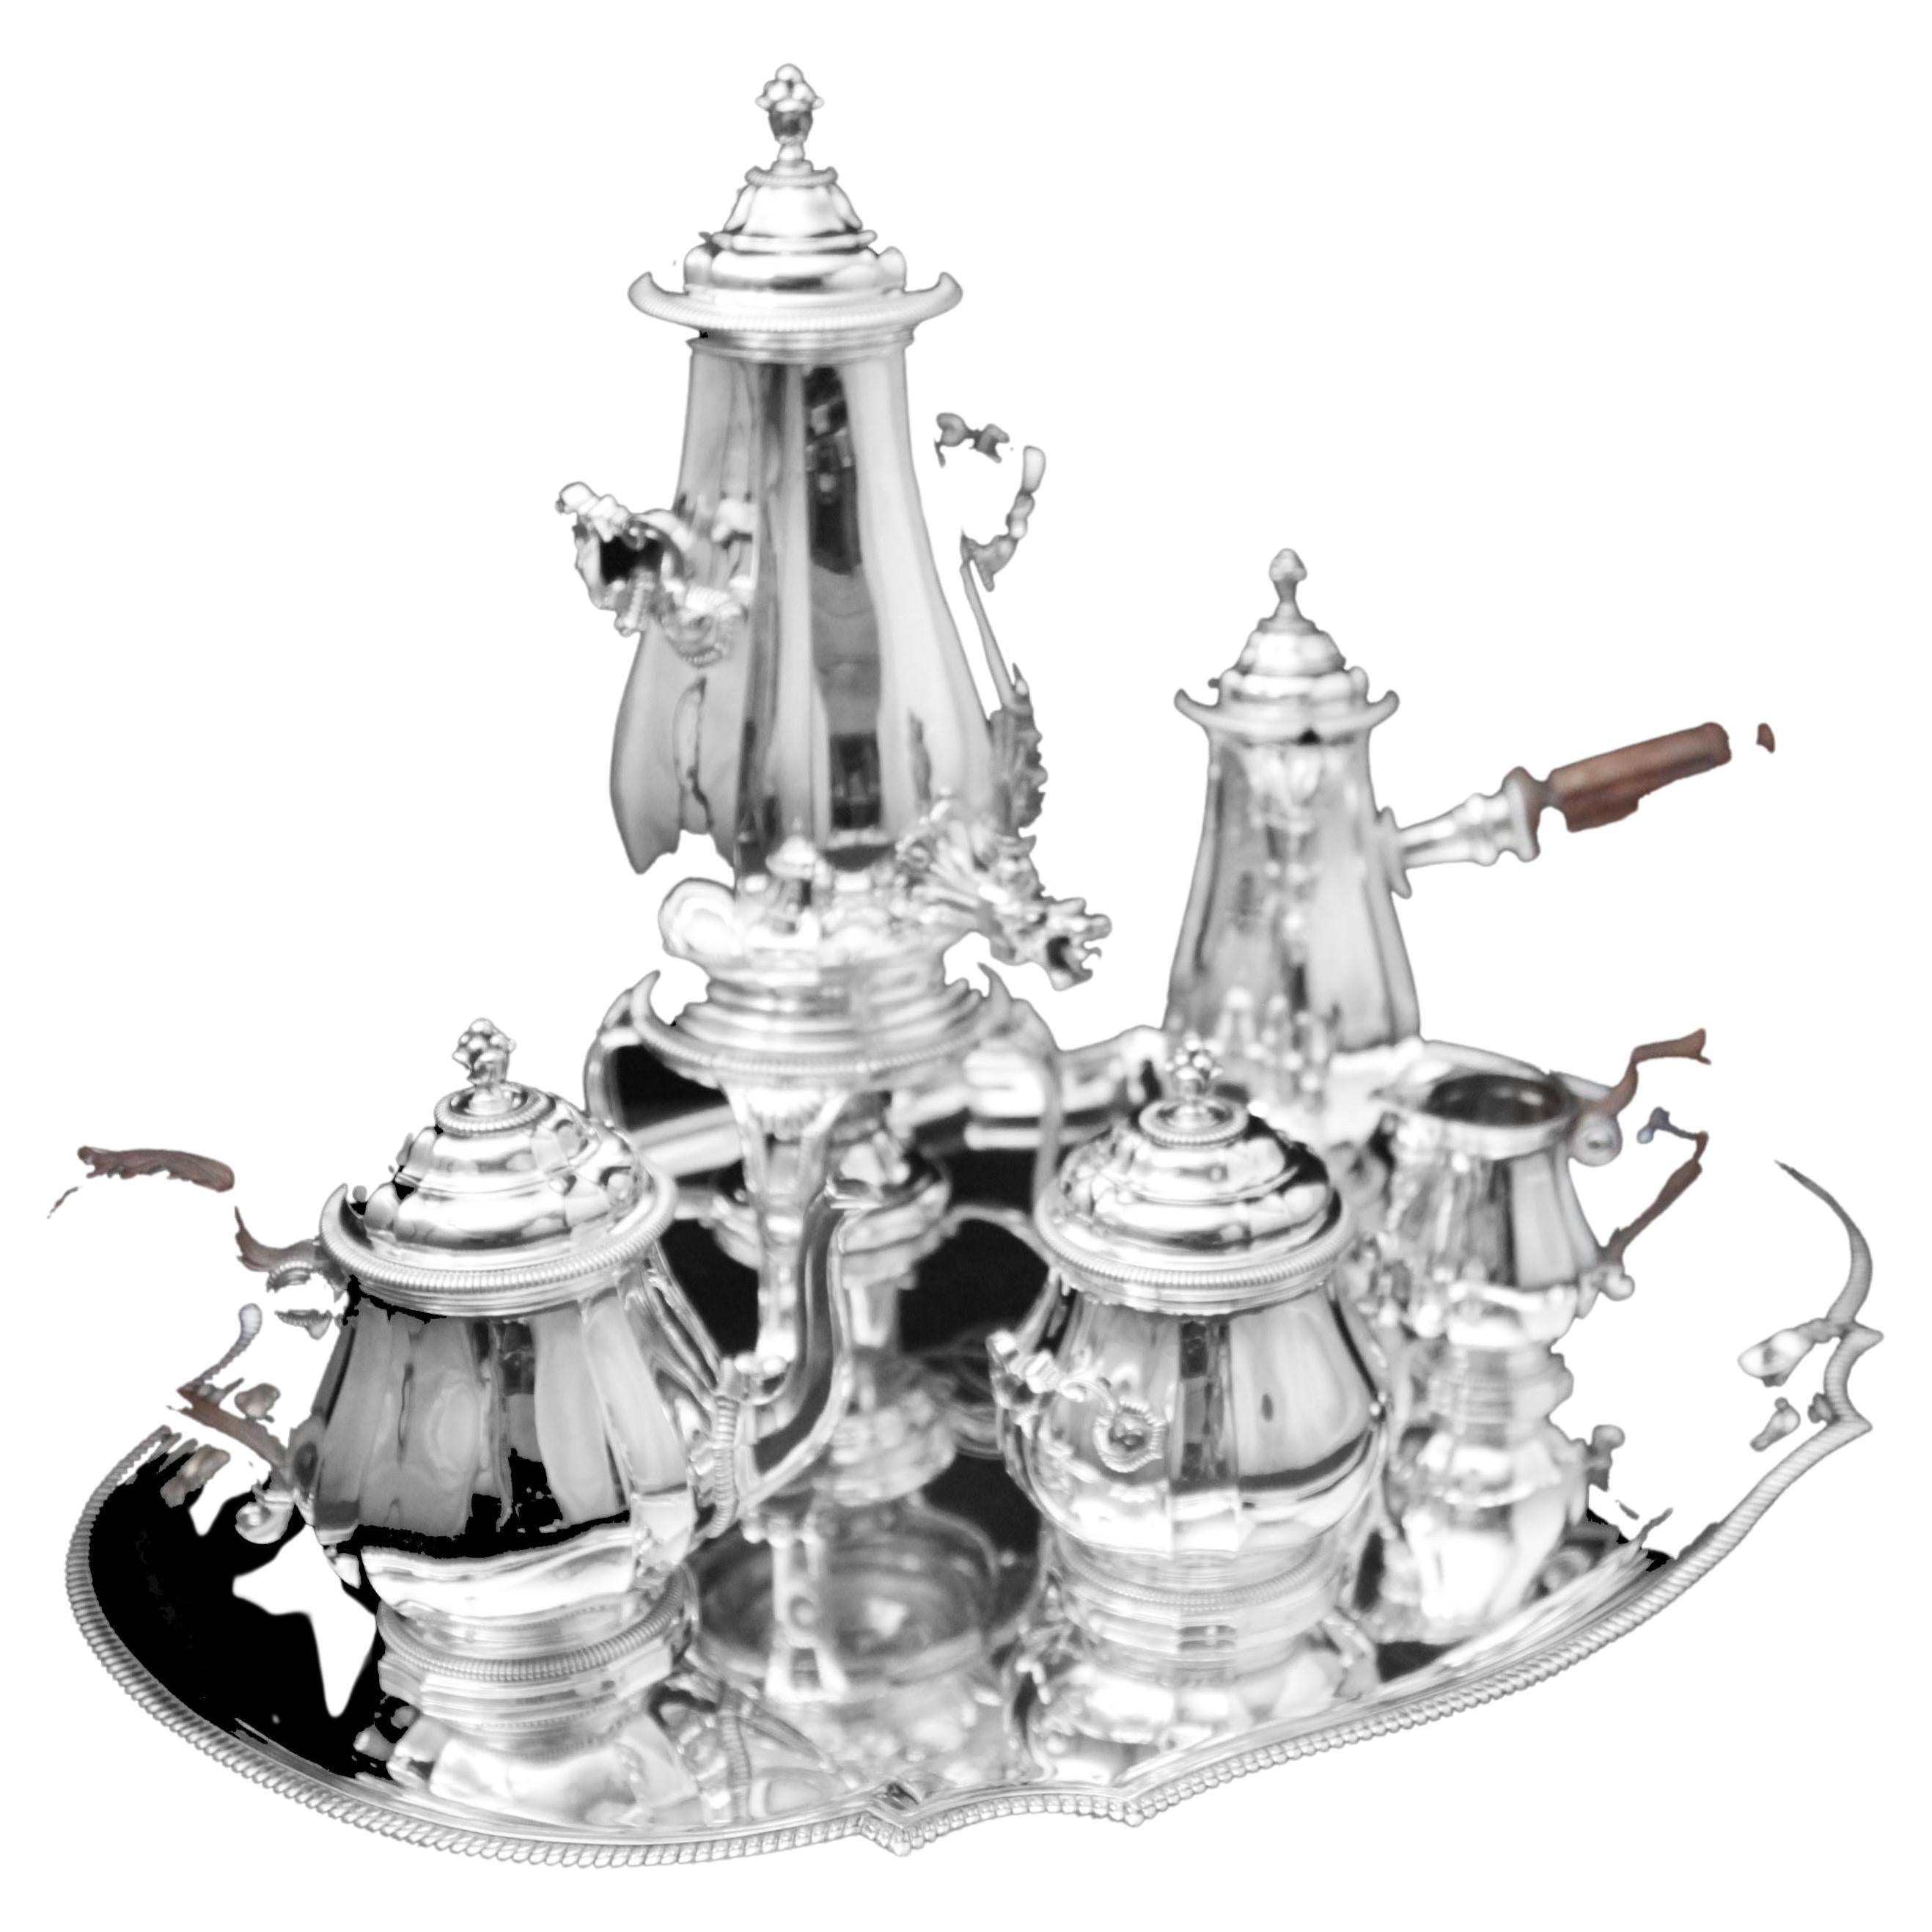 Boin-Taburet: 6pc. Antique French 950 Sterling Silver Tea Set - Like New!